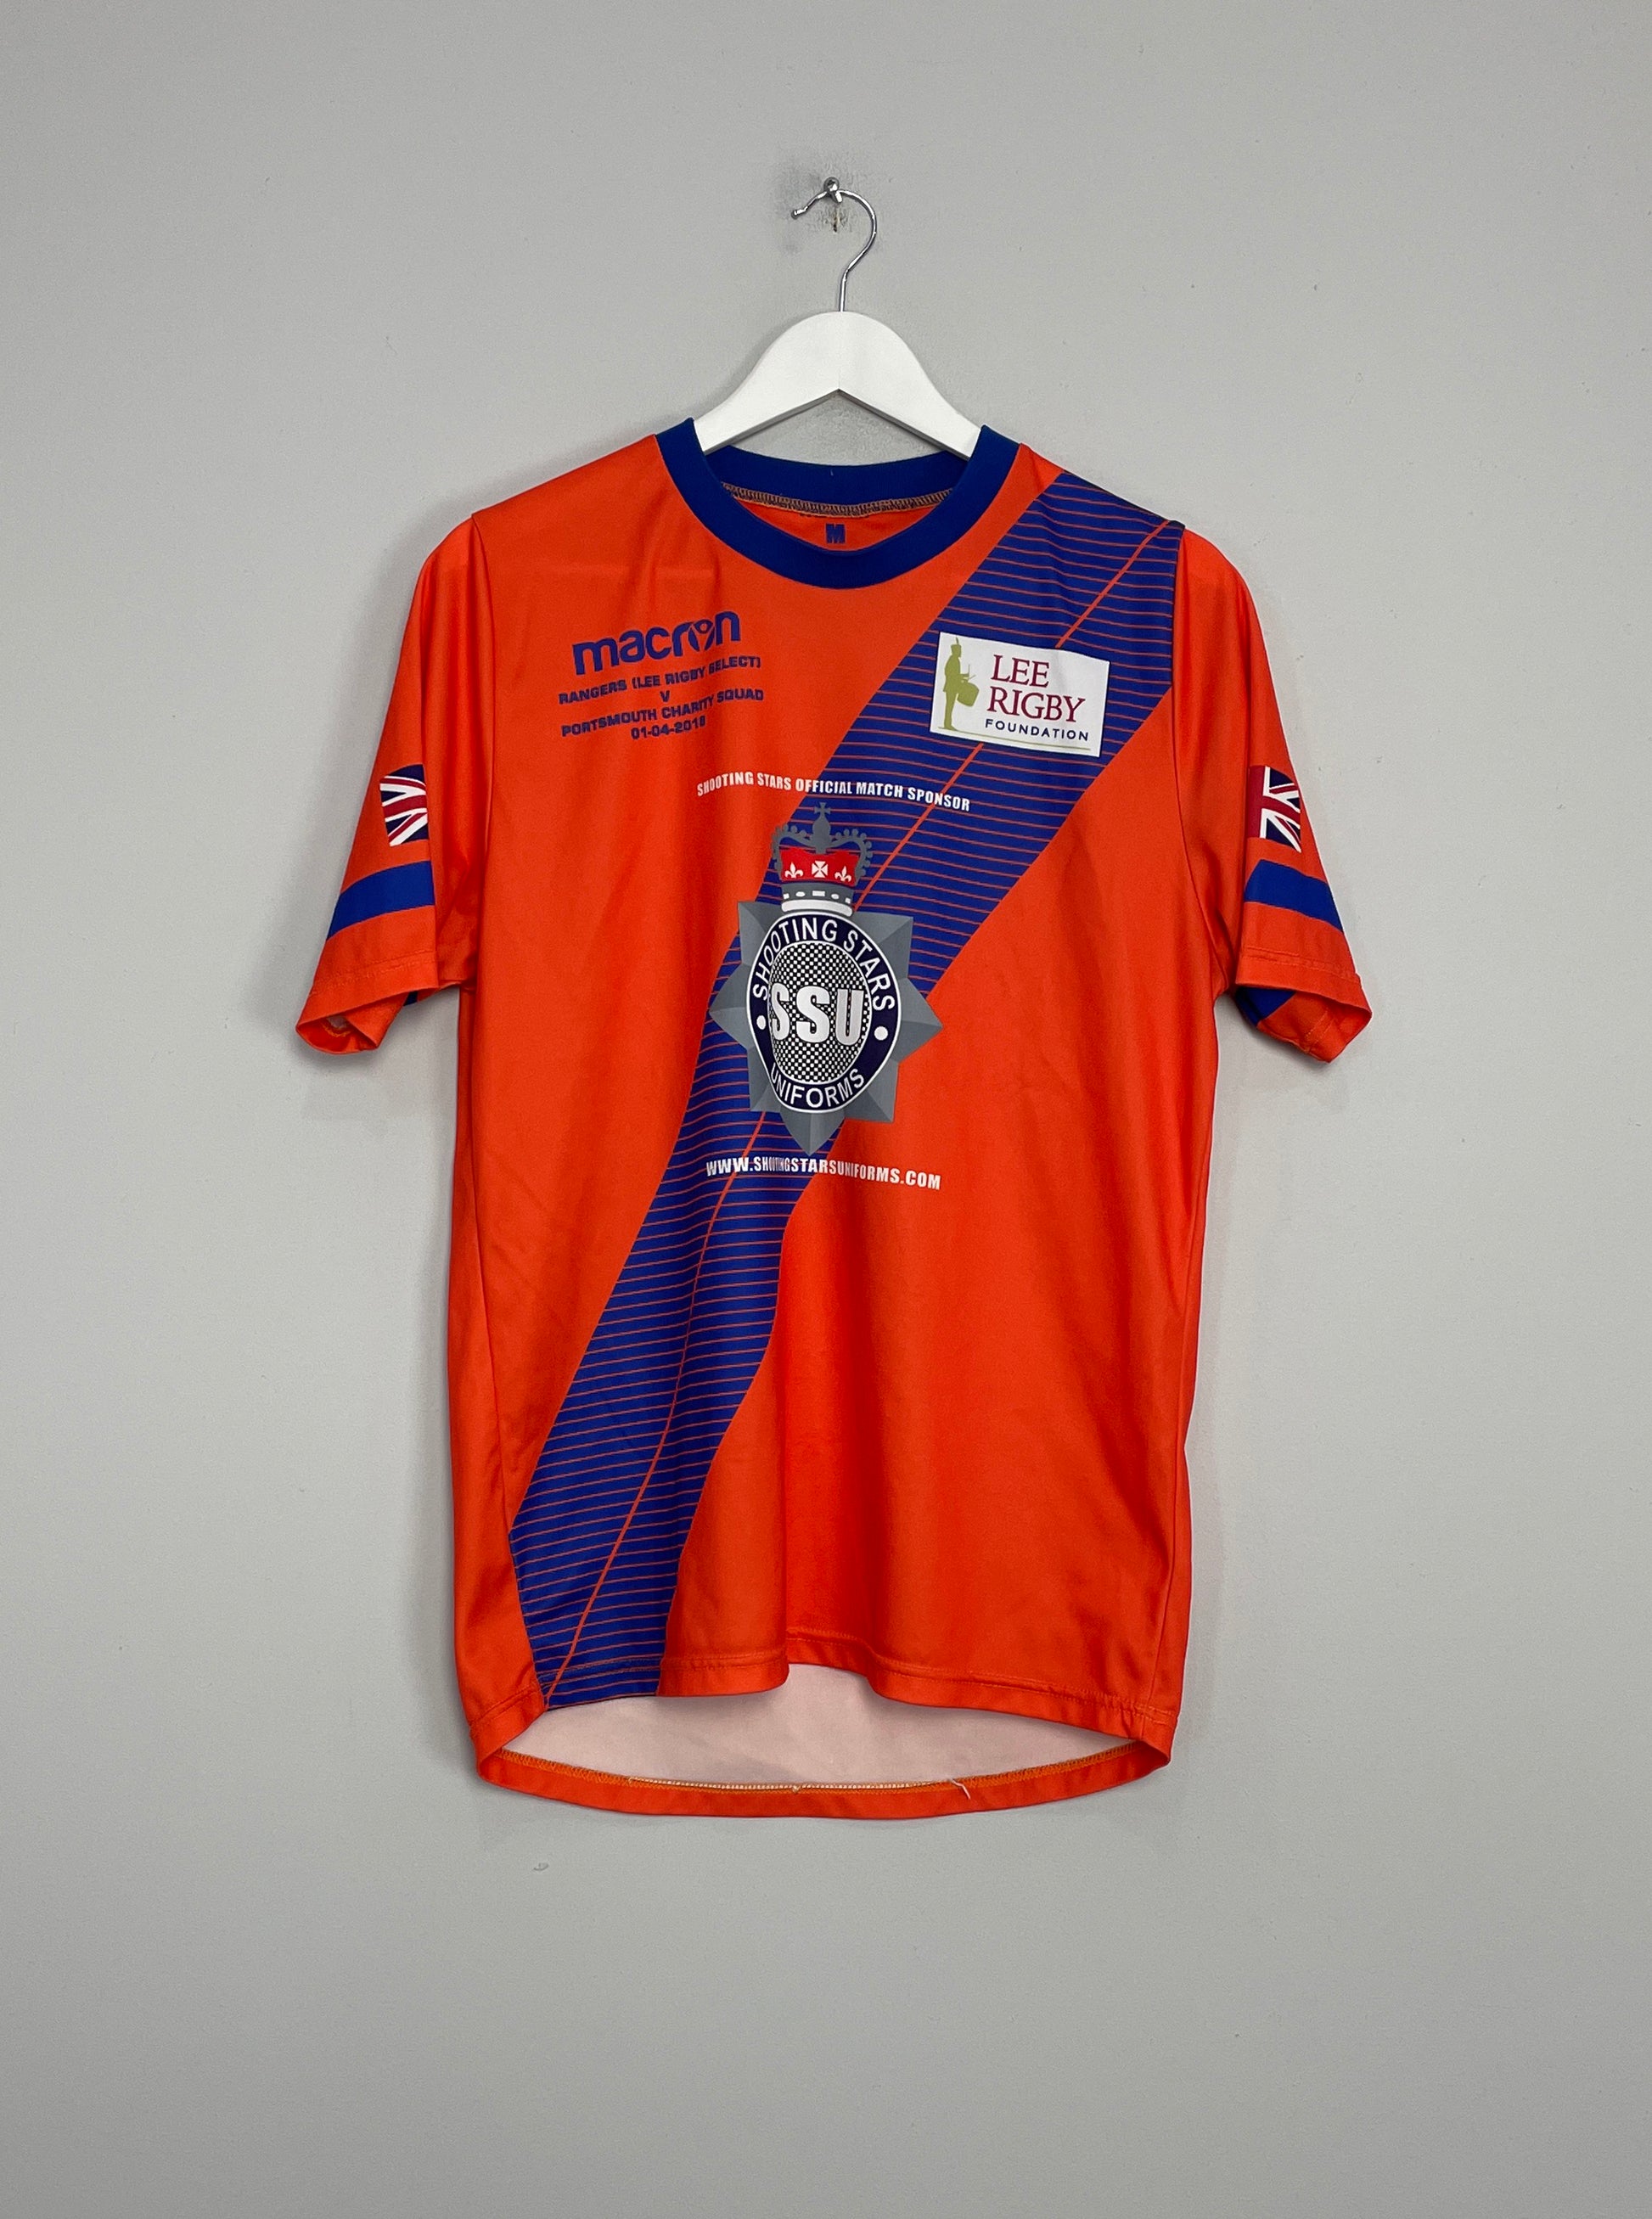 Image of the Shooting stars shirt from the 2018/19 season